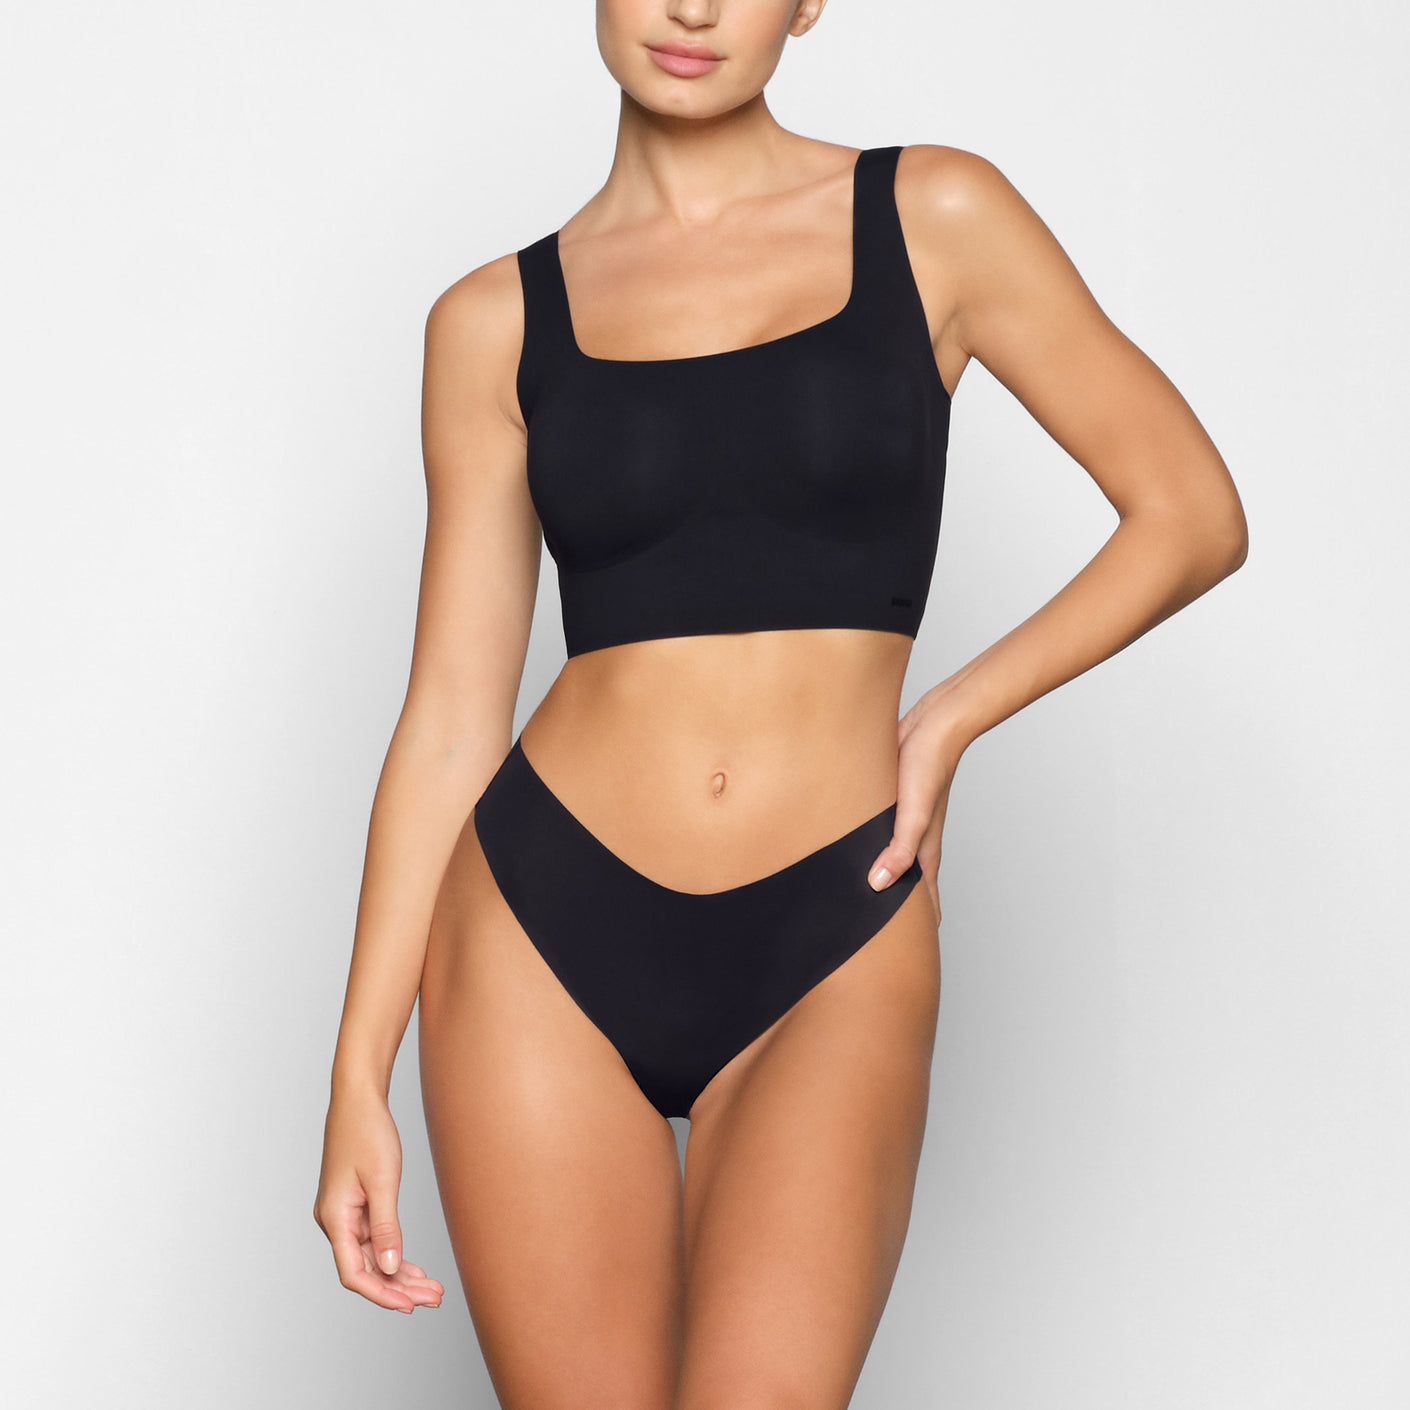 SKIMS Fits Everybody Skimpy Scoop Bralette in Onyx L Black Size L - $55 New  With Tags - From Matilda